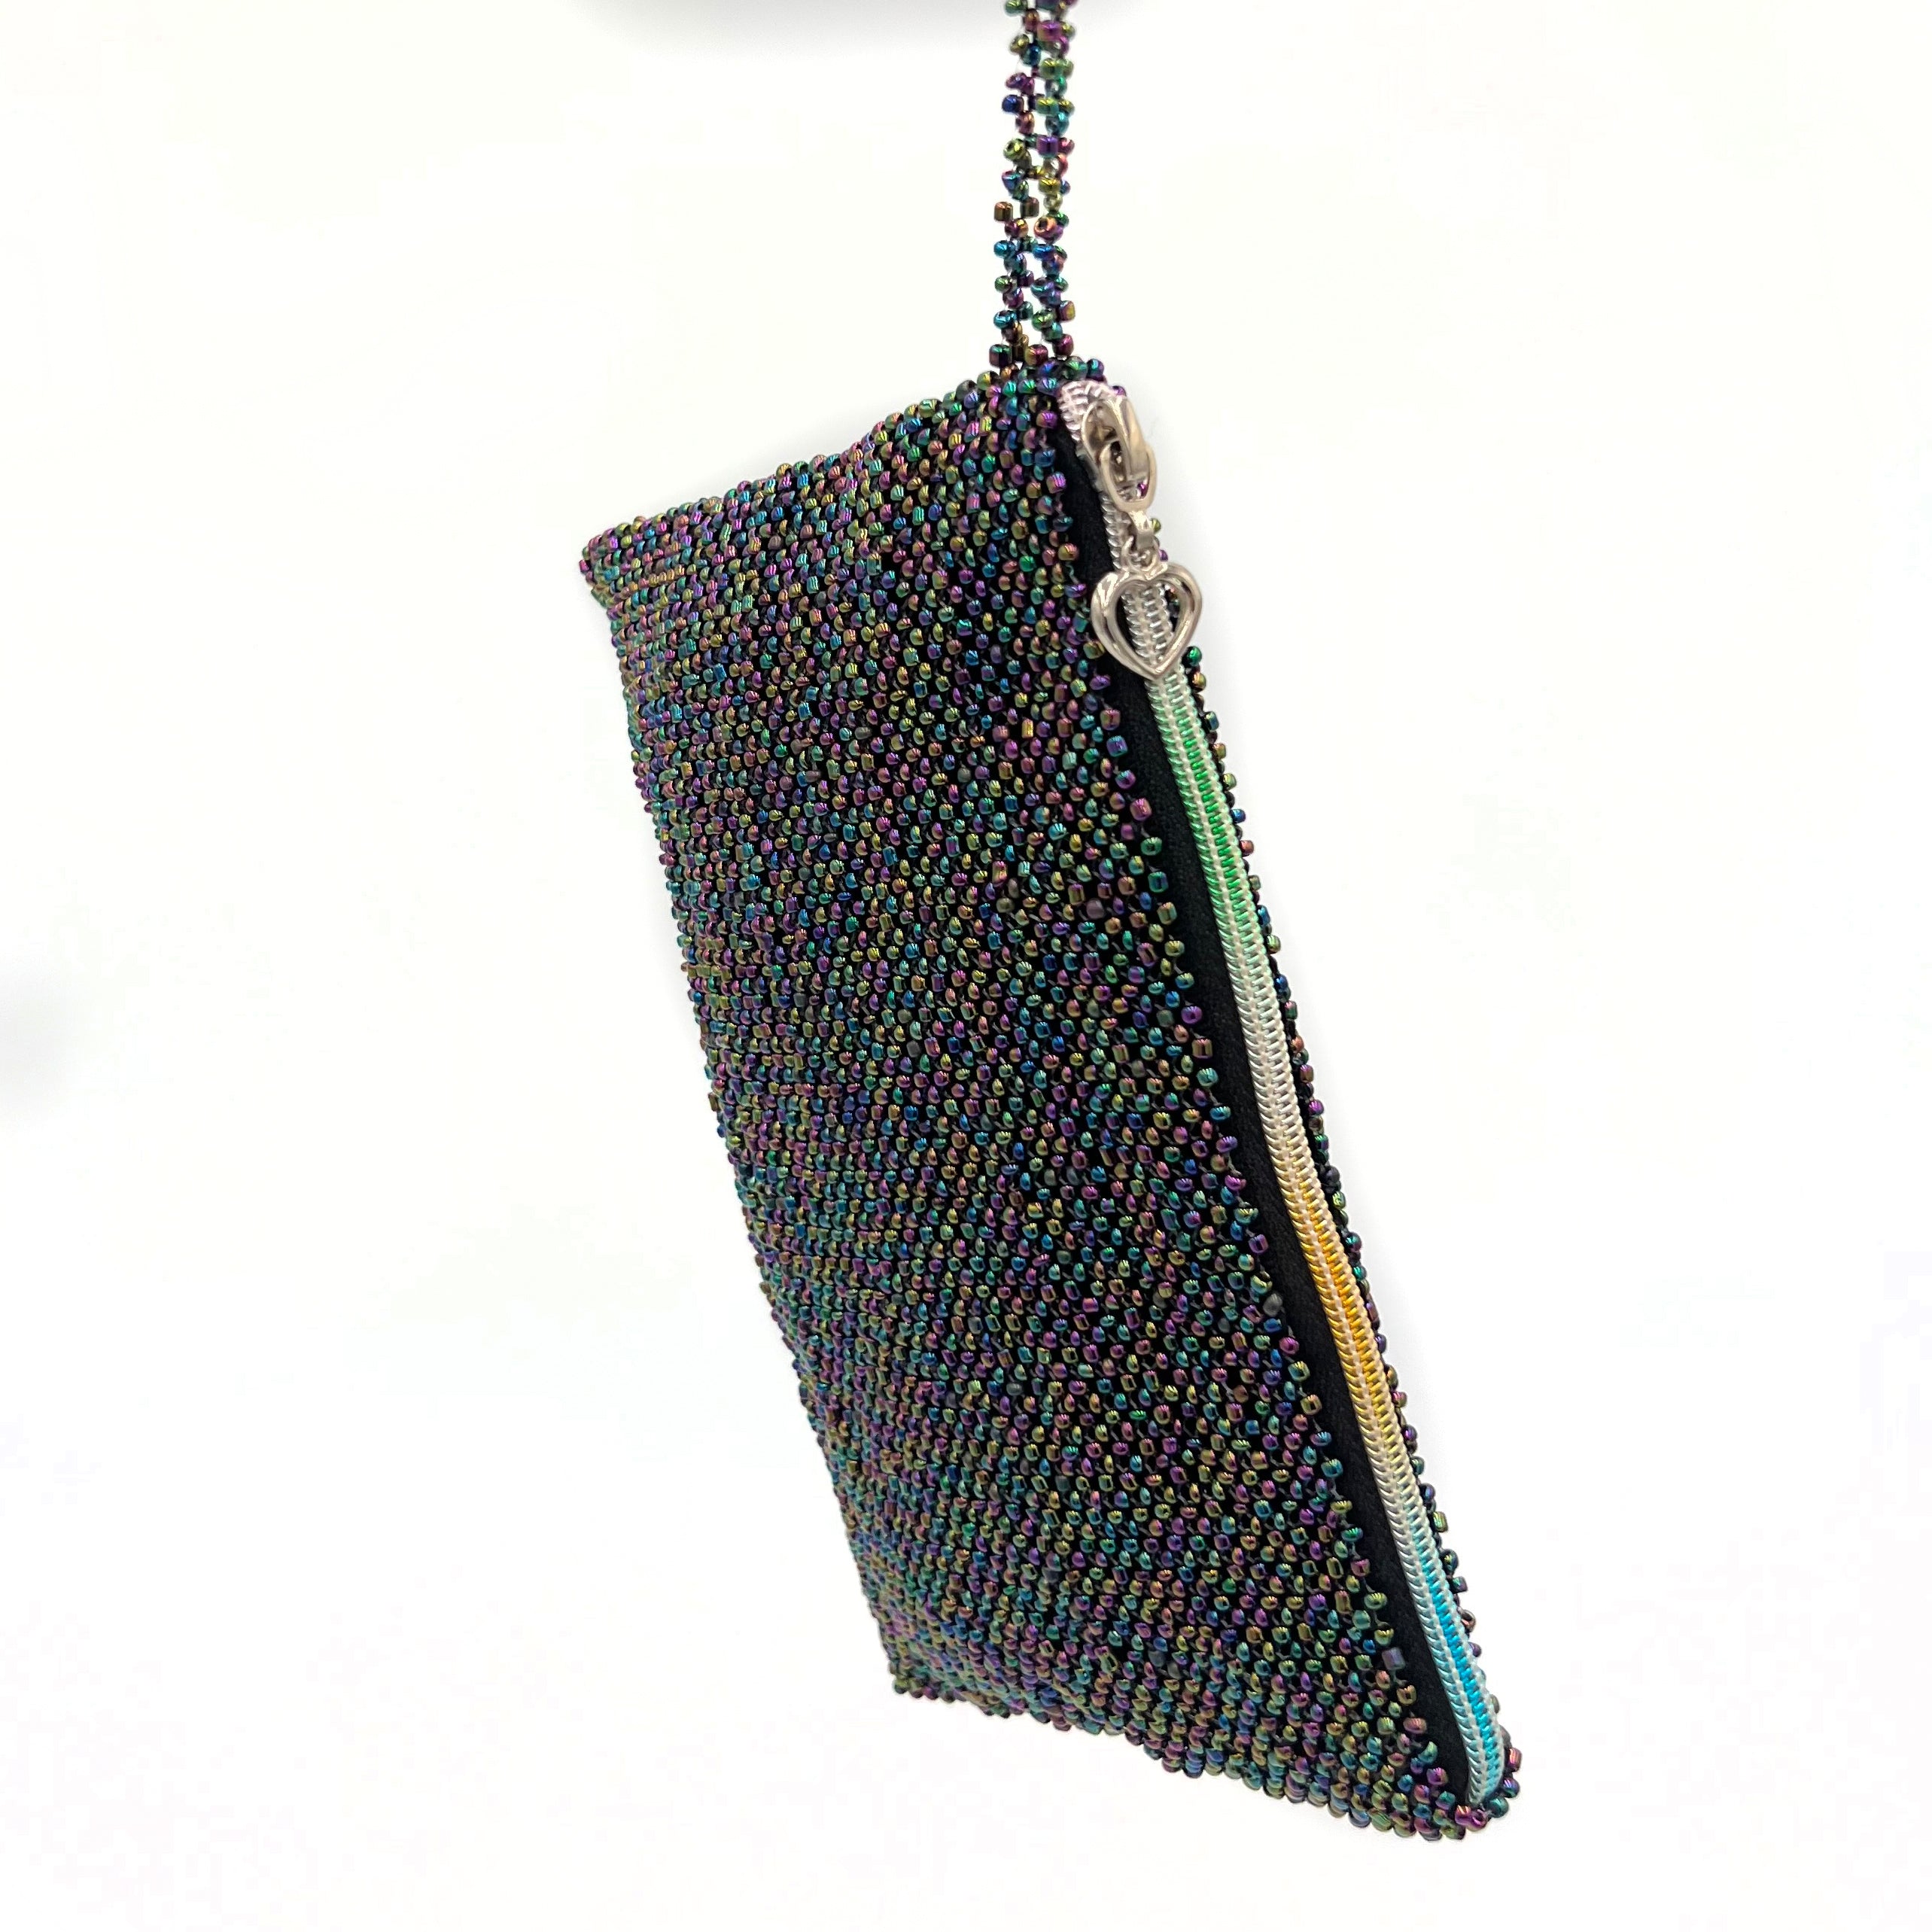 Seed Bead Pouch in Iridescent